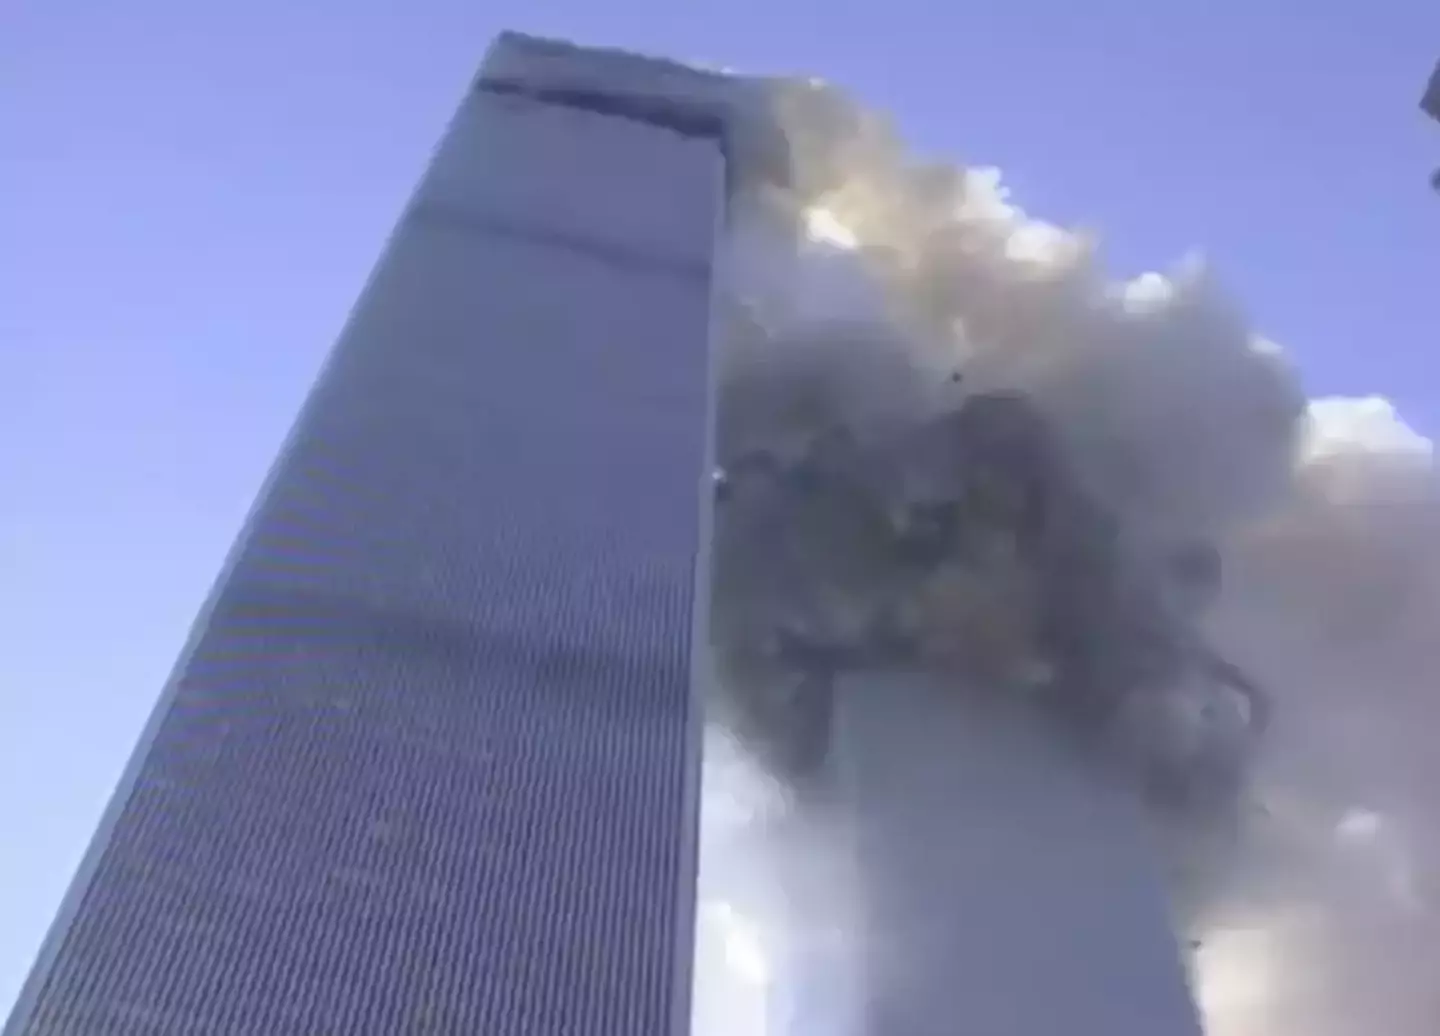 Years after 9/11, the strange discovery was made beneath the rubble.